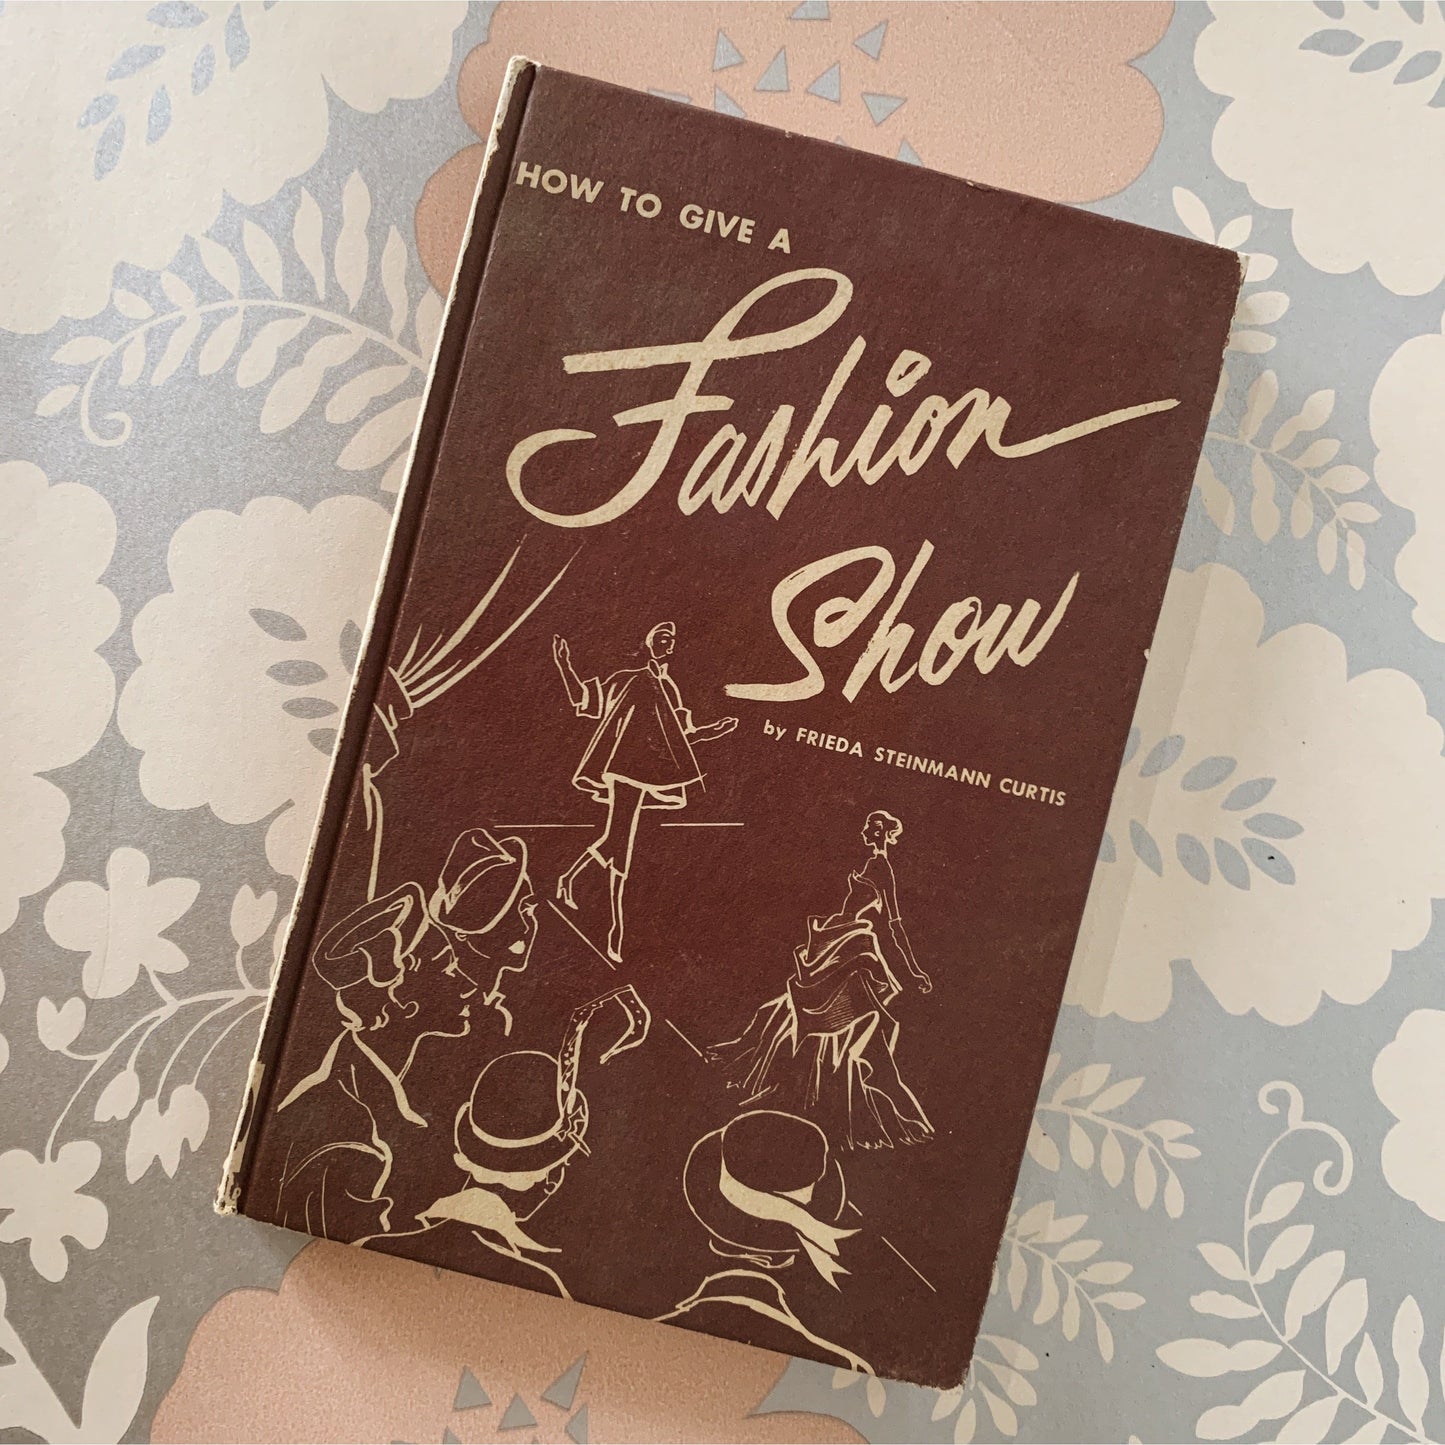 How to Give a Fashion Show, 1957 Hardcover